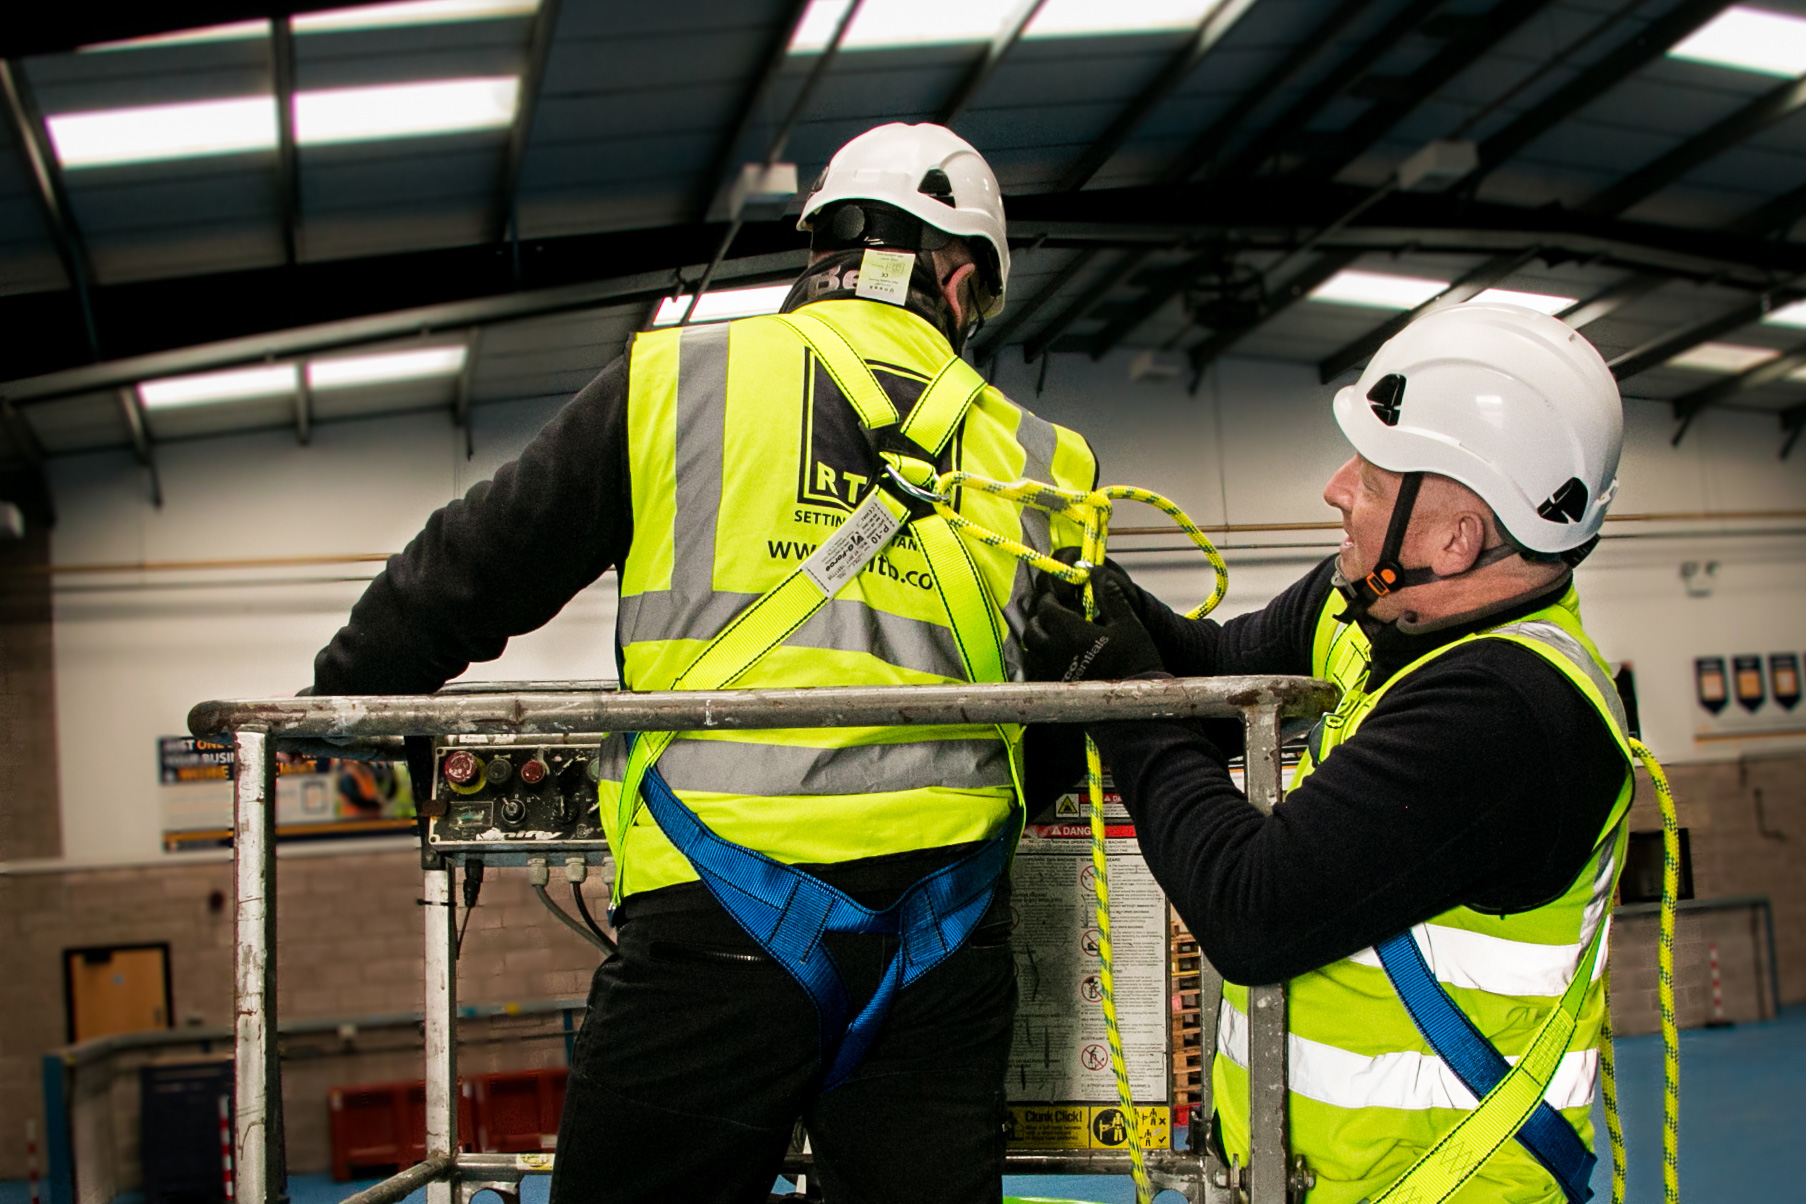 RTITB has launched an updated Mobile Elevating Work Platform (MEWP) training course to ensure operators have the skills and knowledge to work safely and efficiently at height. 